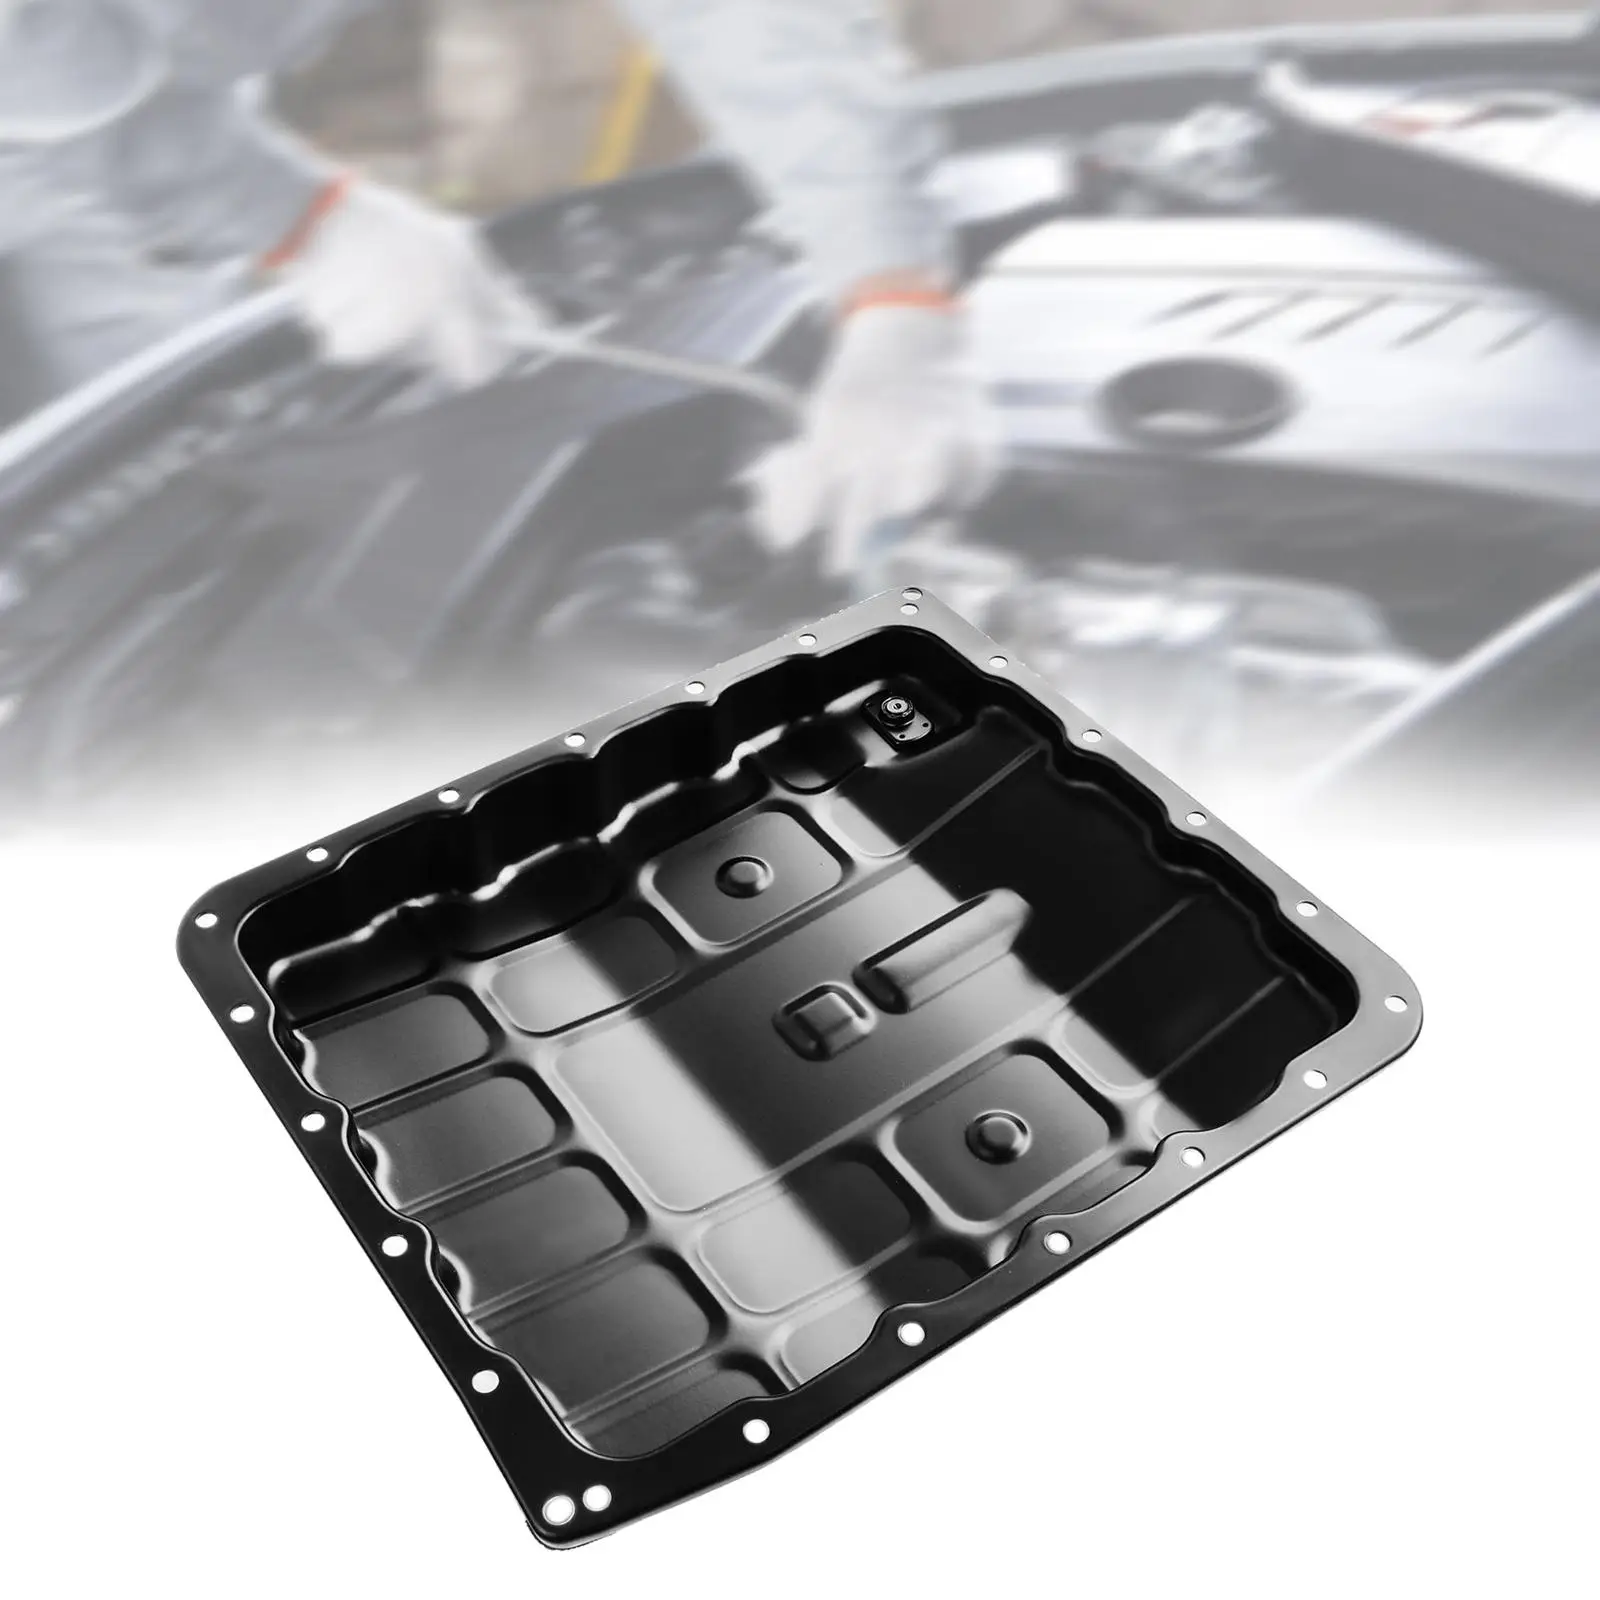 Transmission Oil Pan 3139090x0B Heavy Duty Easy to Install Supplies Replace Parts for Nissan 350Z Titan Pathfinder Armada